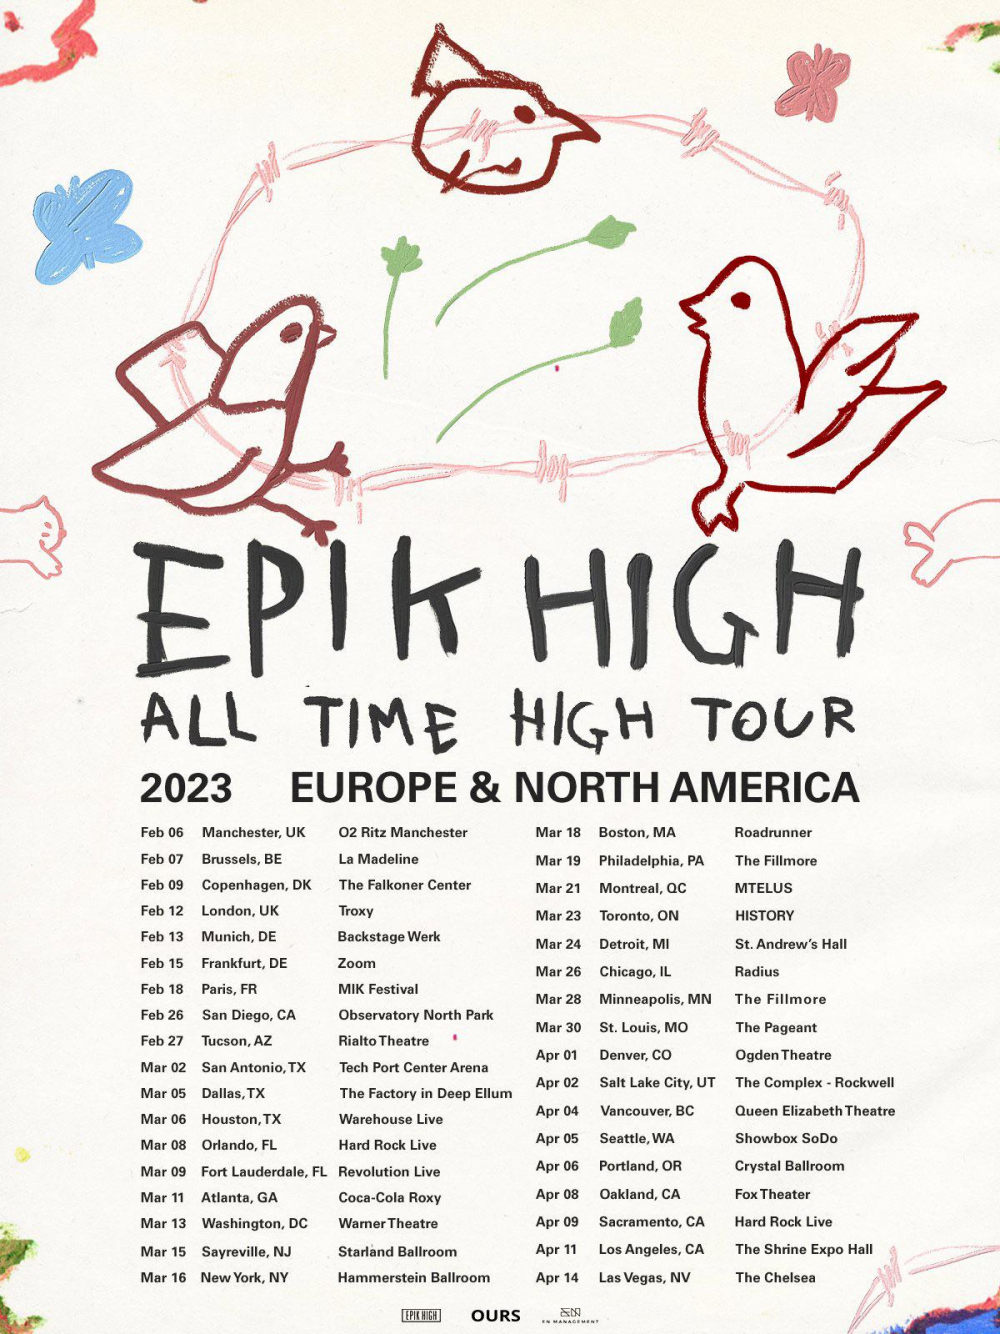 Epik High announces the Europe and North America tour cities and dates